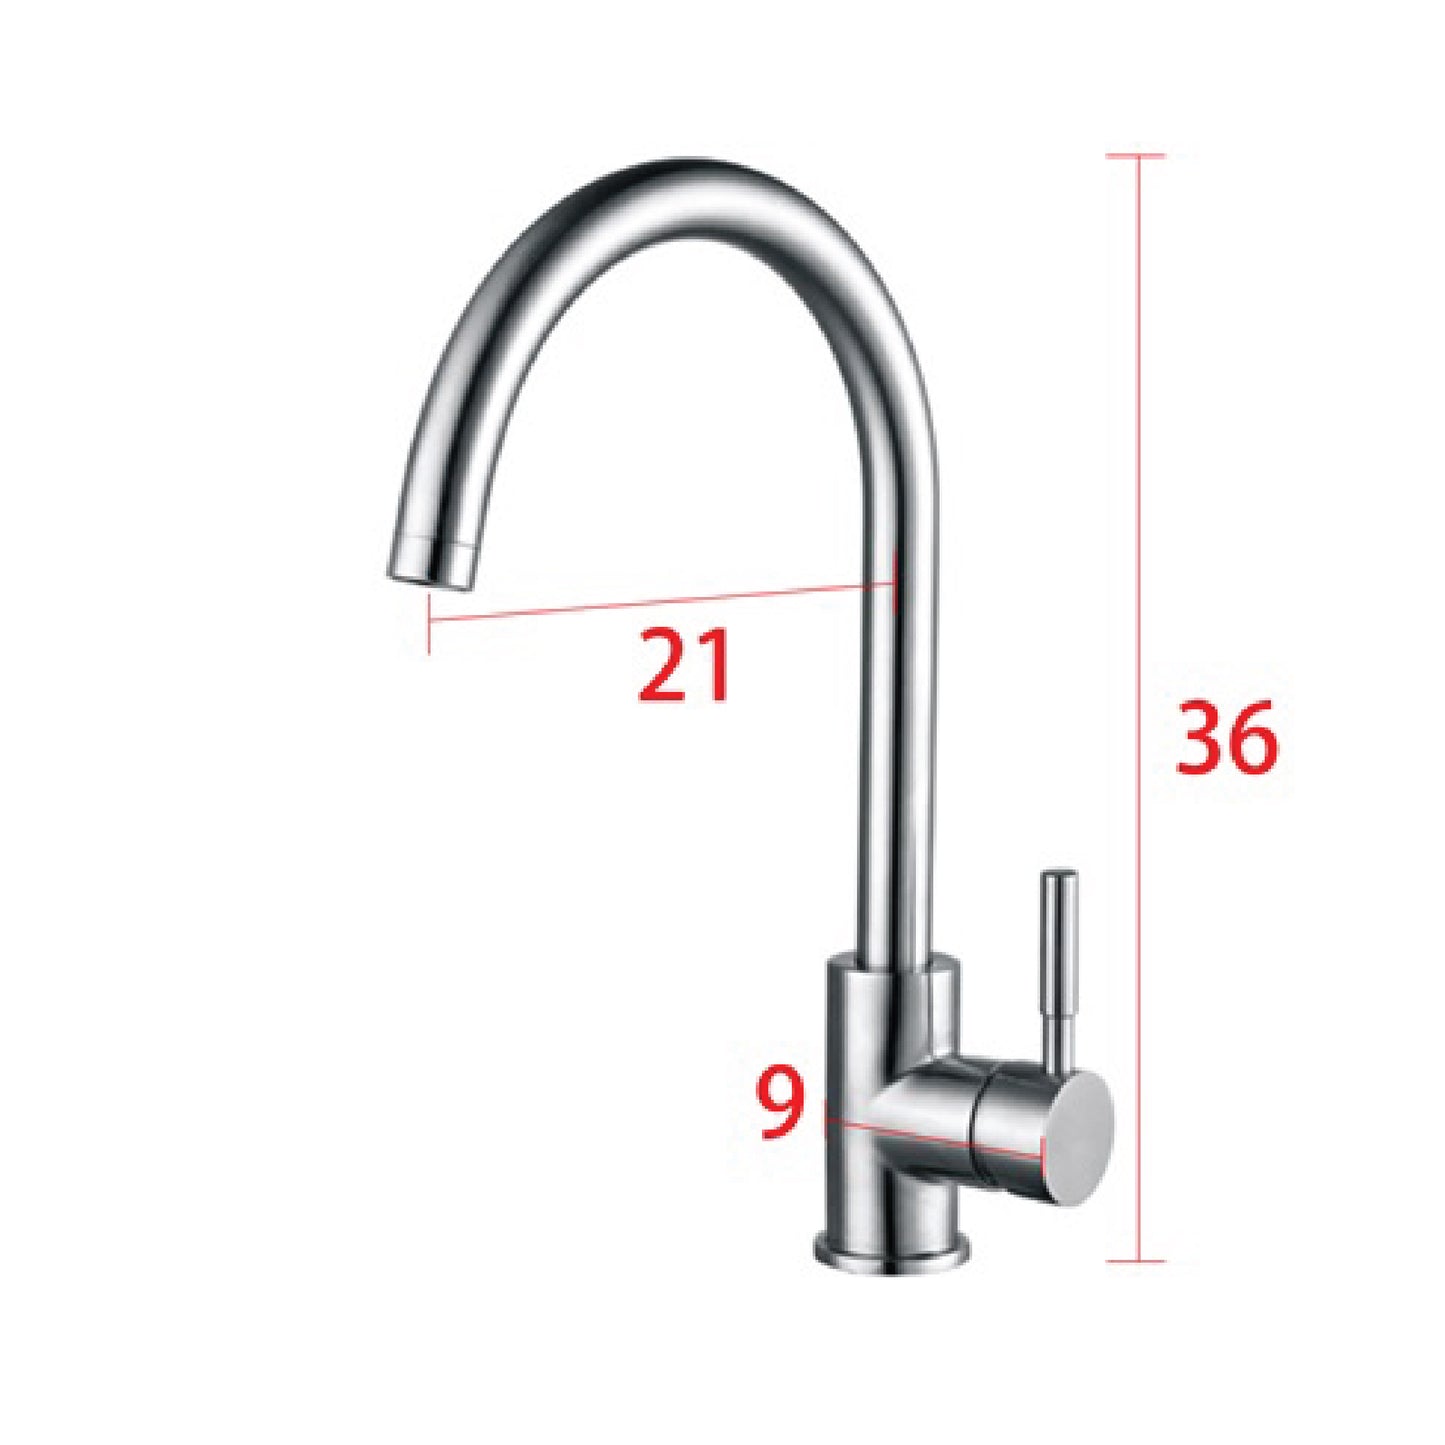 Mcoco Ss304 Kitchen Mixer Faucet Brushed Nickel 36x9x21cm Each - YT-2508MSS